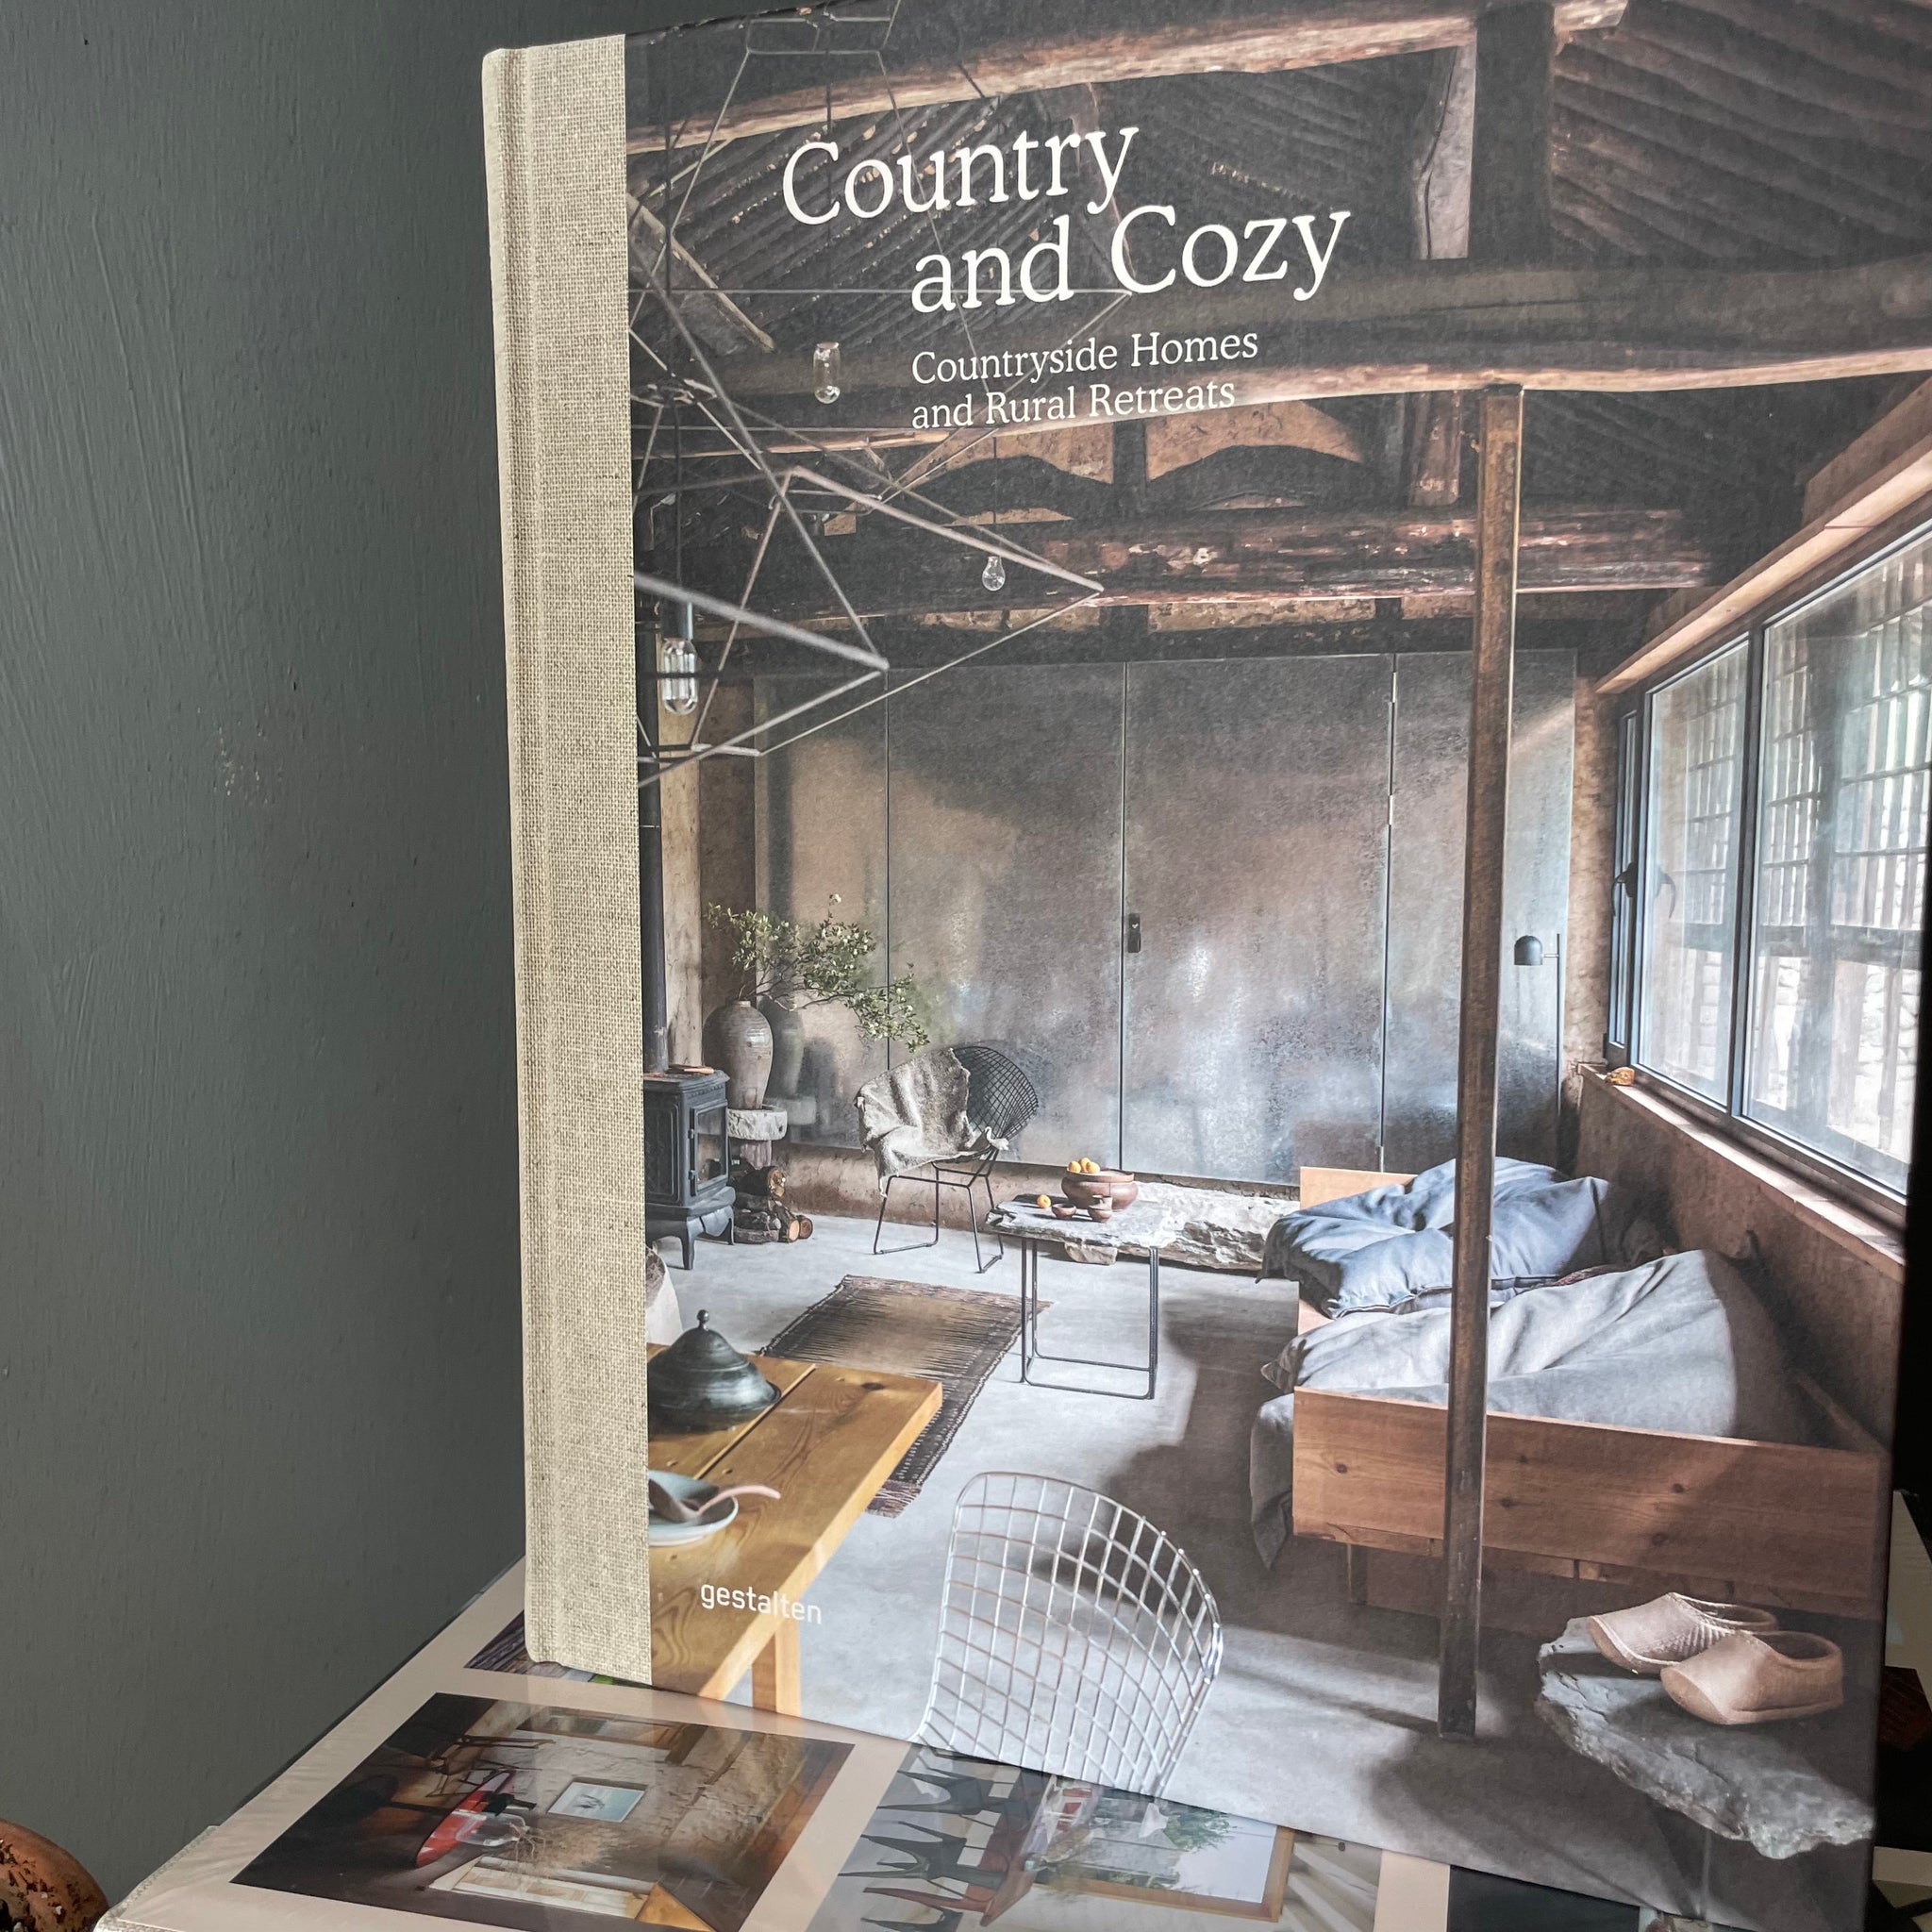 Country and Cozy